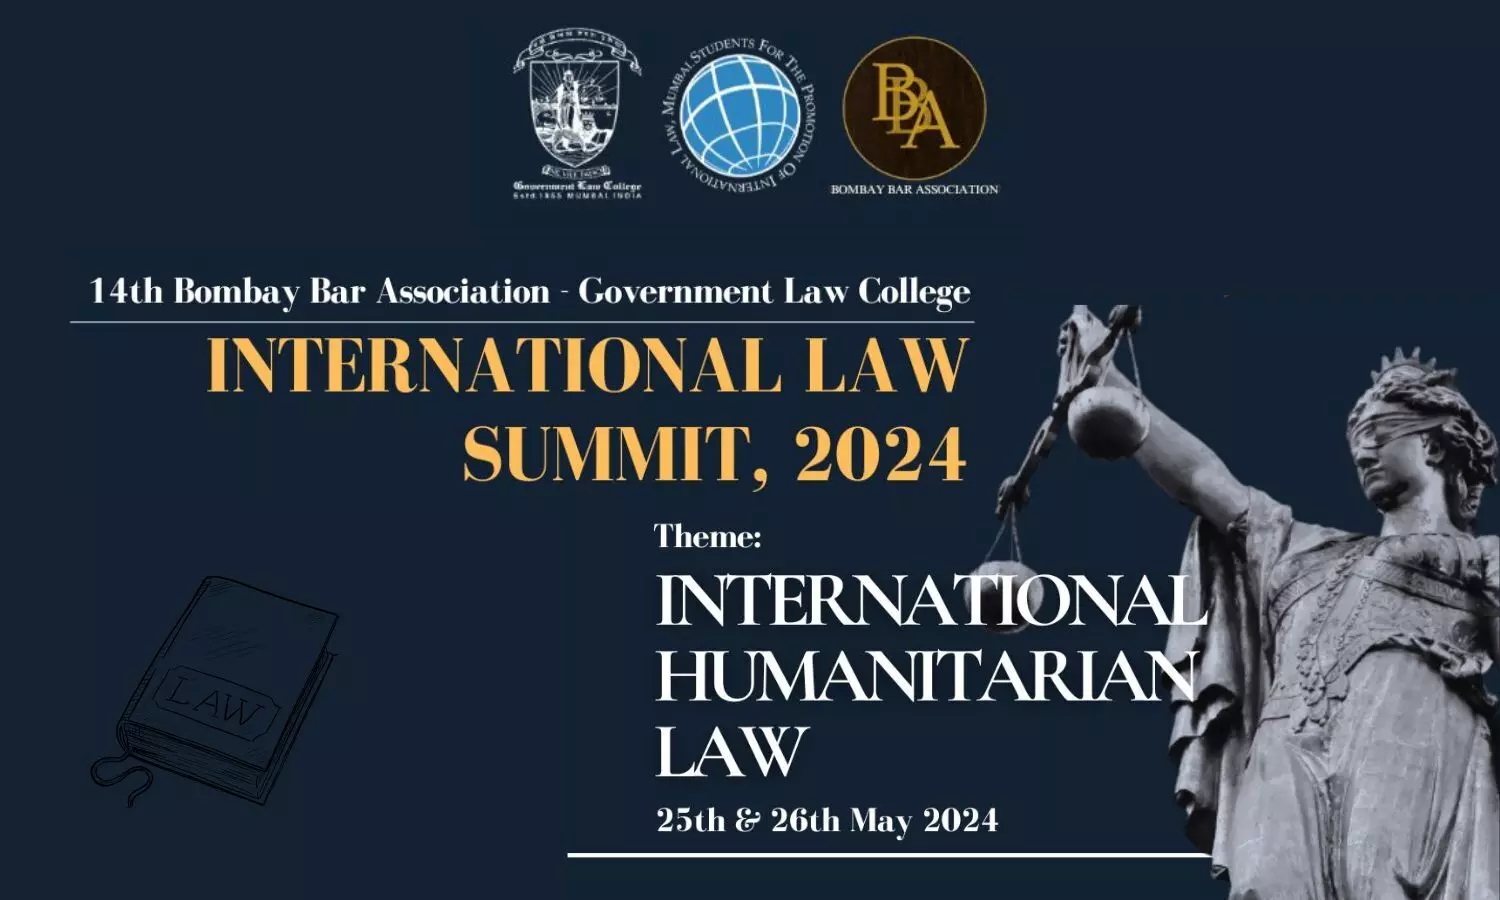 14th Bombay Bar Association - Government Law College International Law Summit, 2024 | SPIL Mumbai | 25th & 26th May